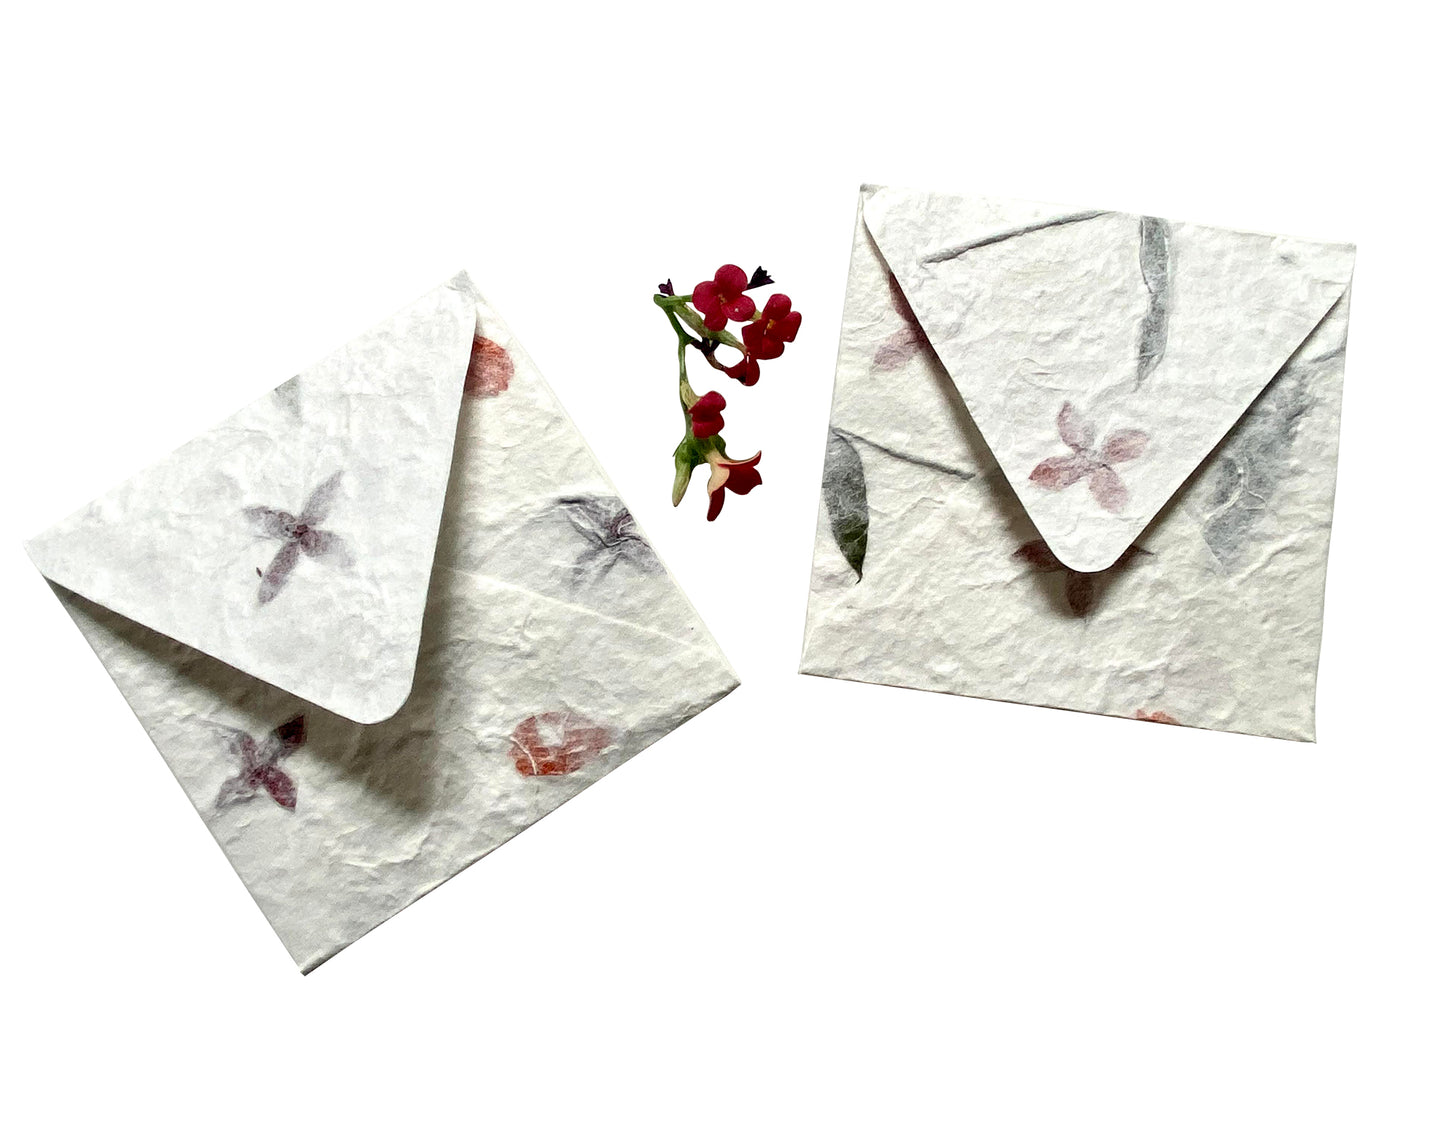 10 Envelope Per Pack Mulberry Paper Pressed Flower Inclusion Paper Handmade Envelope 10 x 10 CM - SIZE 3.94 INCH